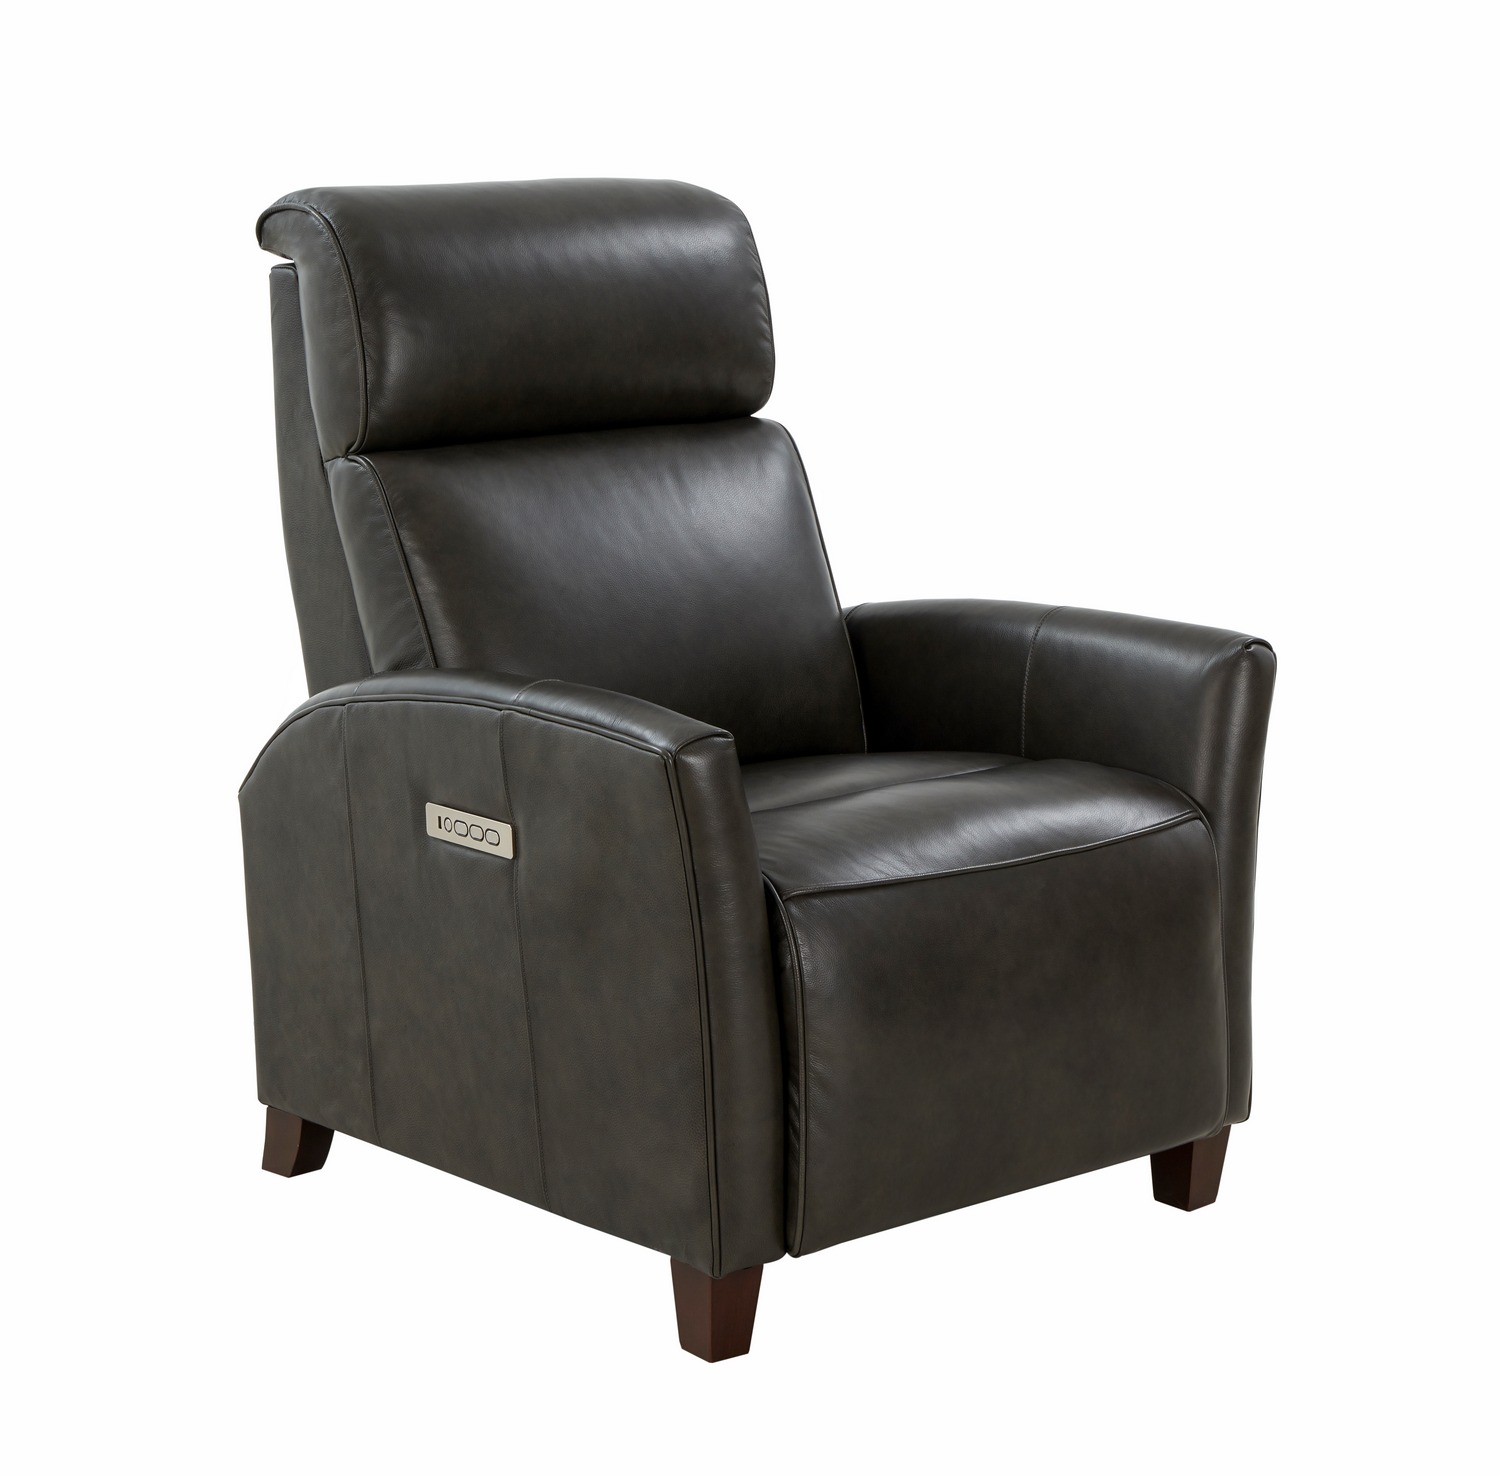 Barcalounger Jasmine Zero Gravity Power Recliner Chair with Power Head Rest and Lumbar - Ashford Graphite/All Leather